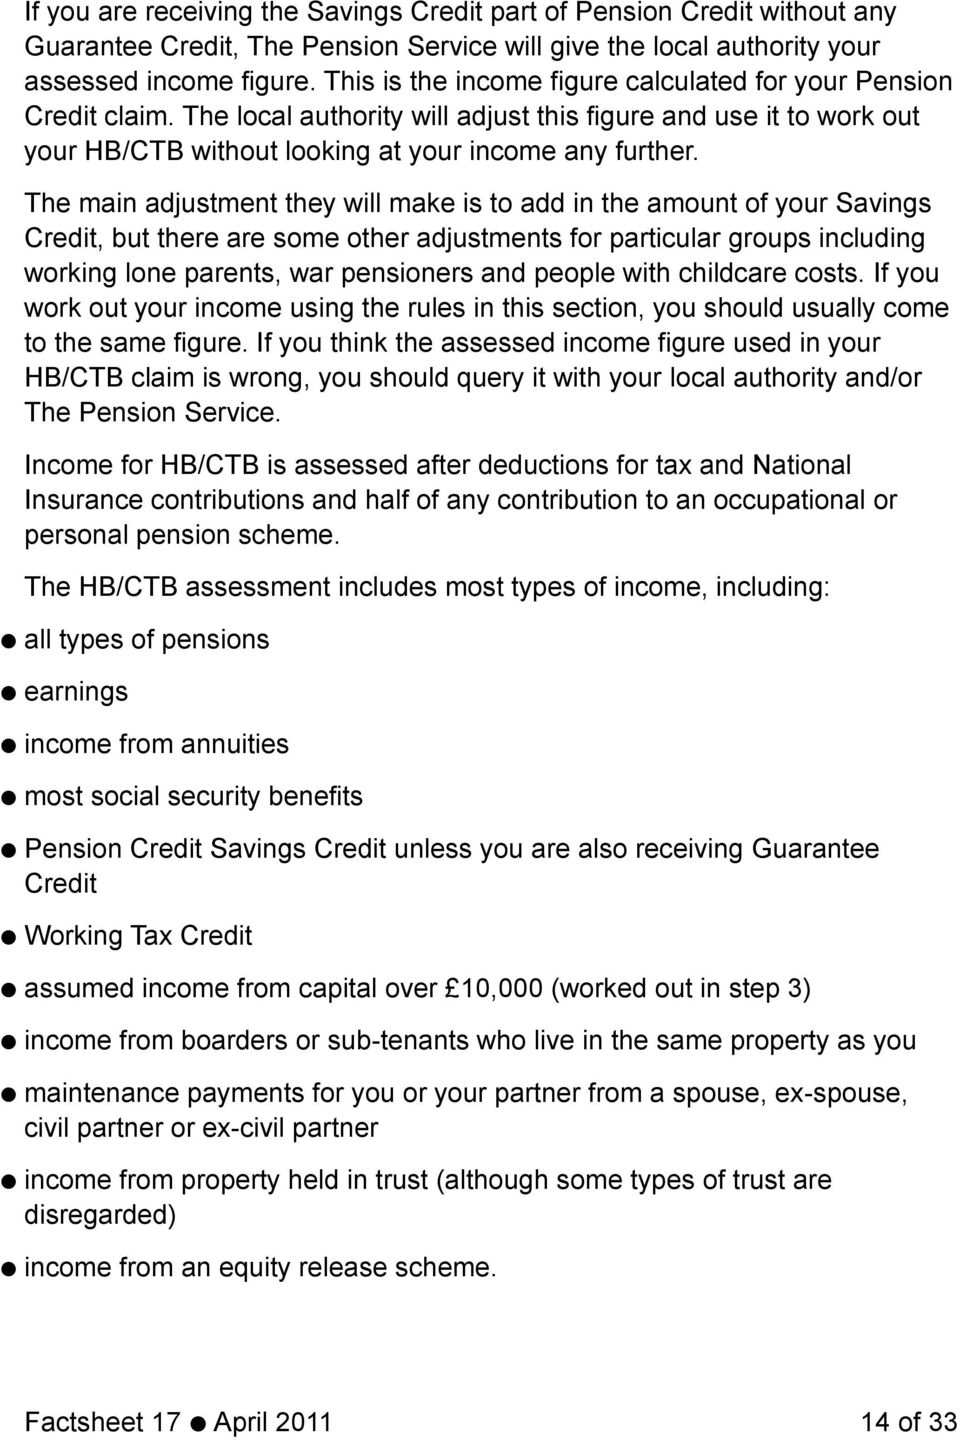 The main adjustment they will make is to add in the amount of your Savings Credit, but there are some other adjustments for particular groups including working lone parents, war pensioners and people